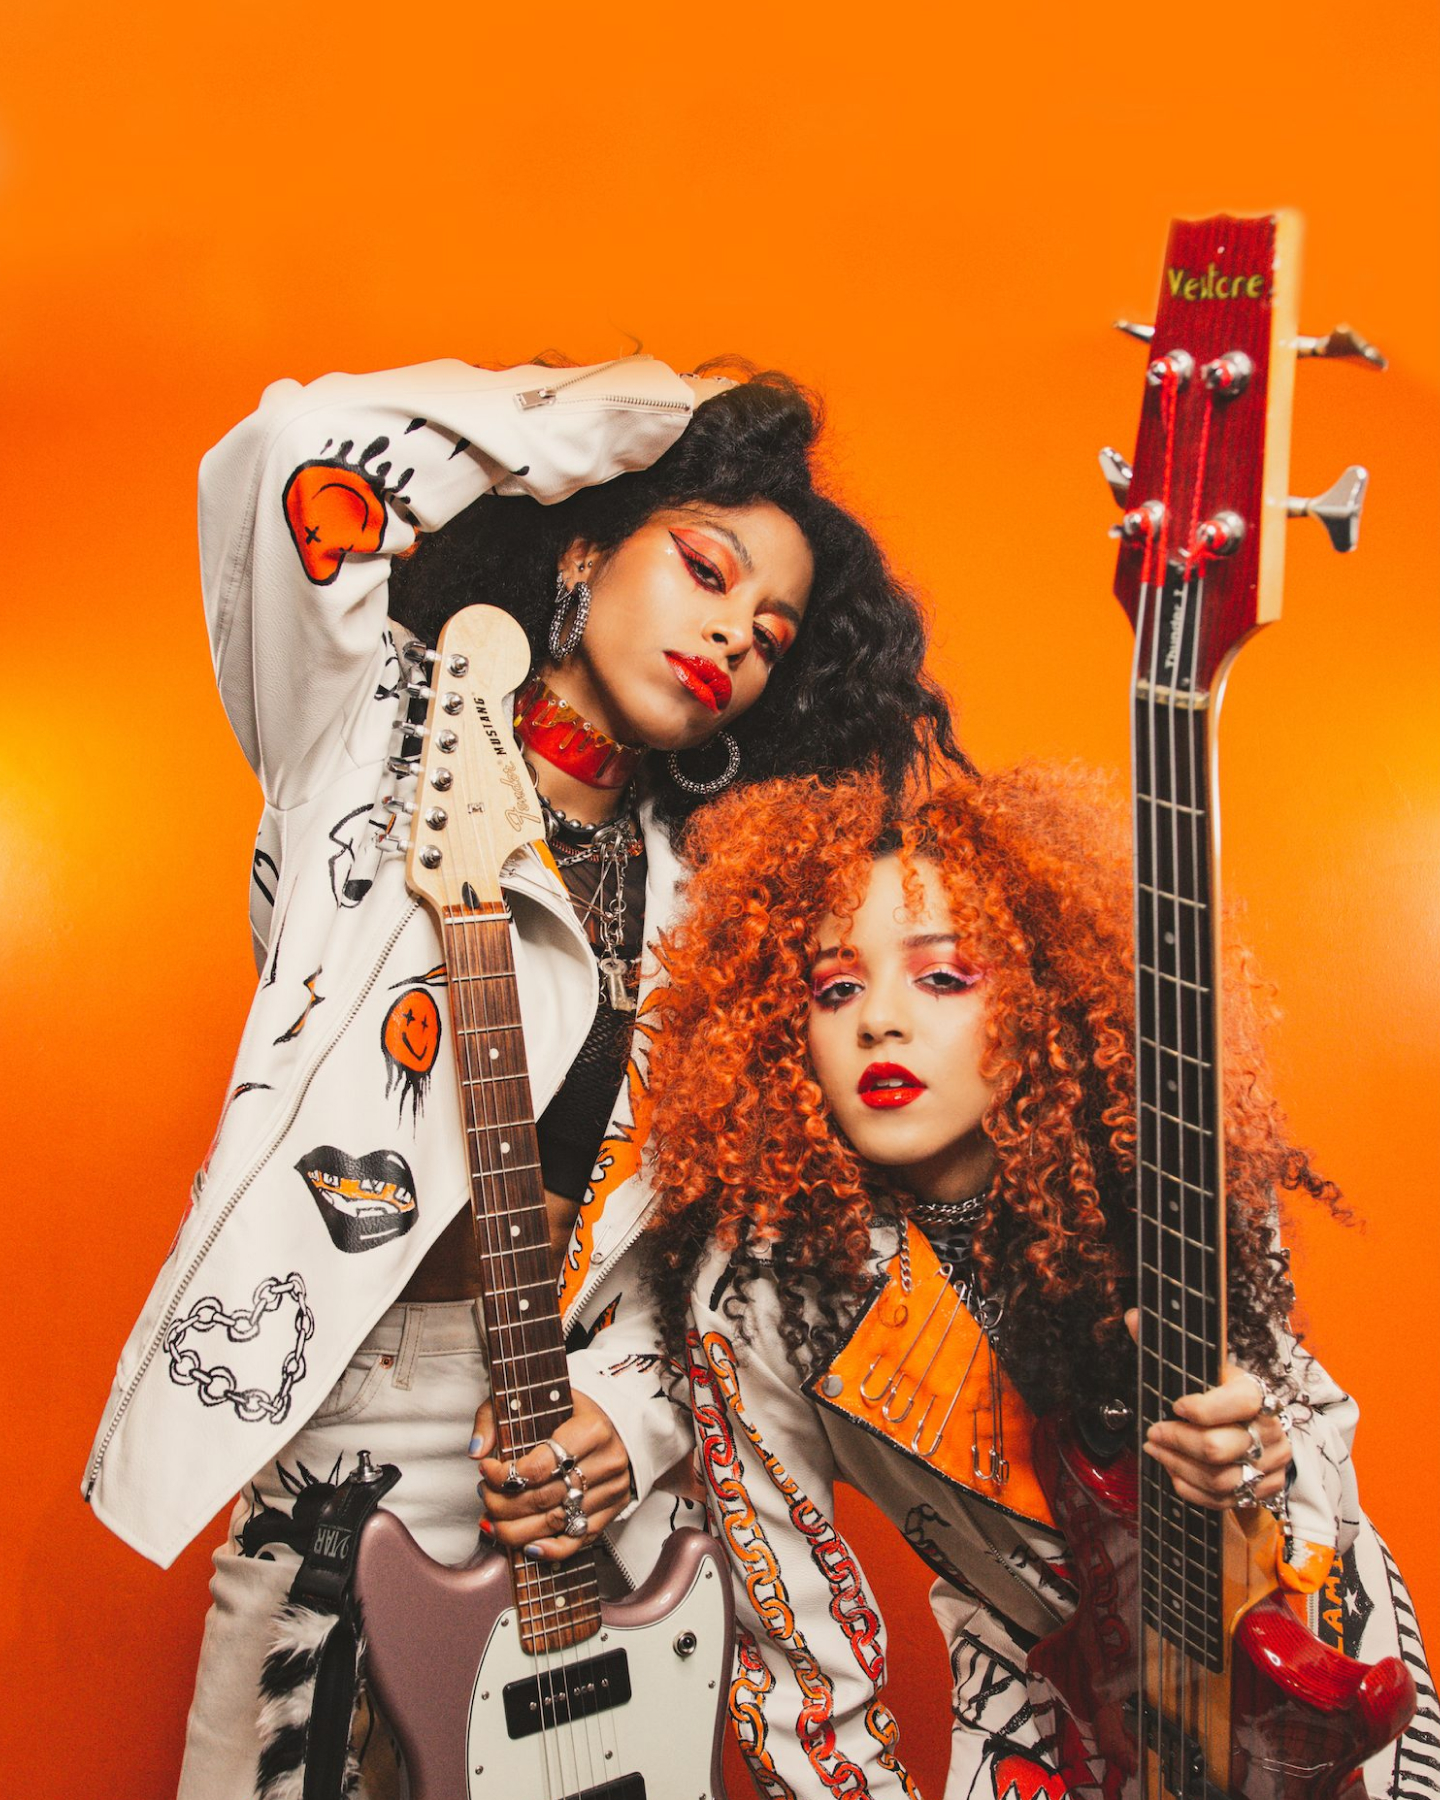 Two stylish musicians, one in a white jacket and the other in an orange blouse, posing with electric guitars against an orange backdrop.